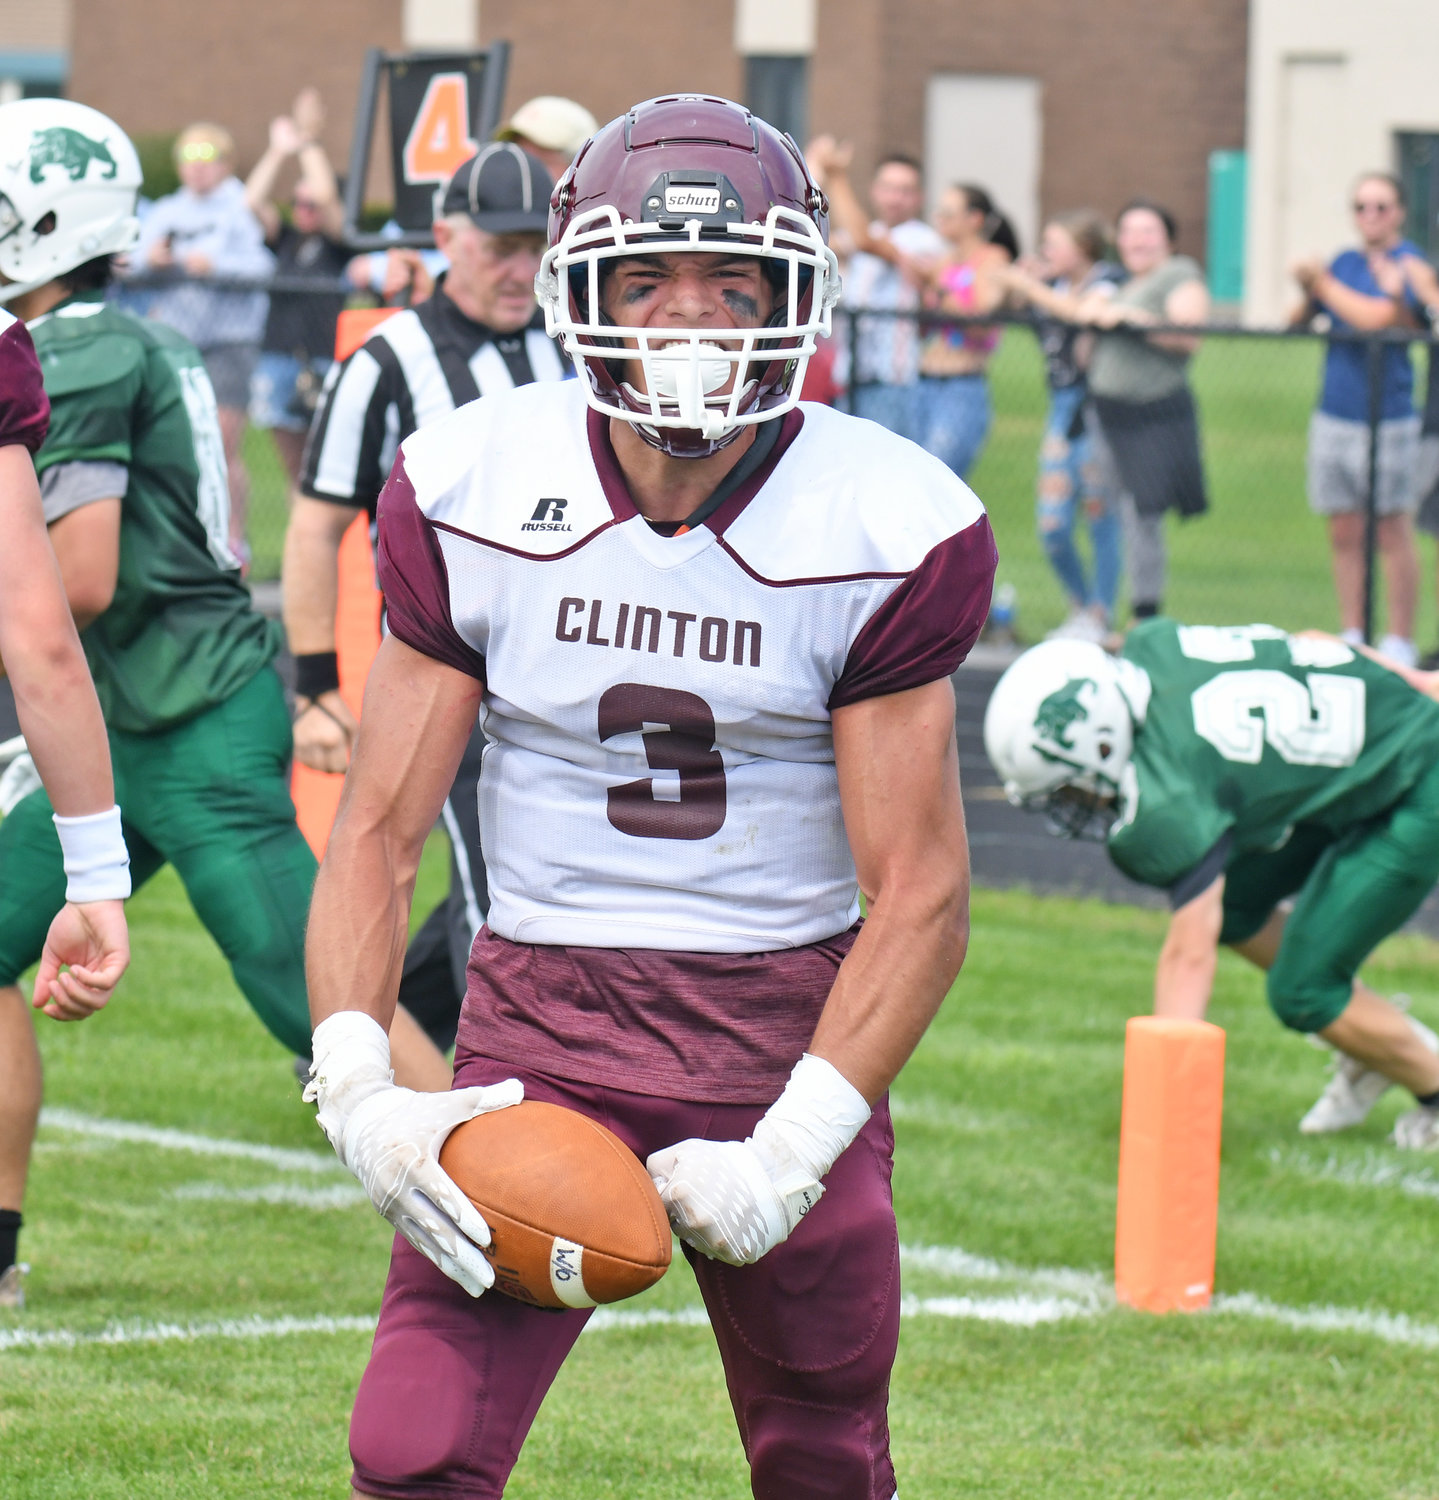 Clinton senior Cameron Maline expresses himself after scoring a touchdown on a punt return in the second quarter during Saturday afternoon's non-league game against host Westmoreland/Oriskany. The Warriors won 28-6.